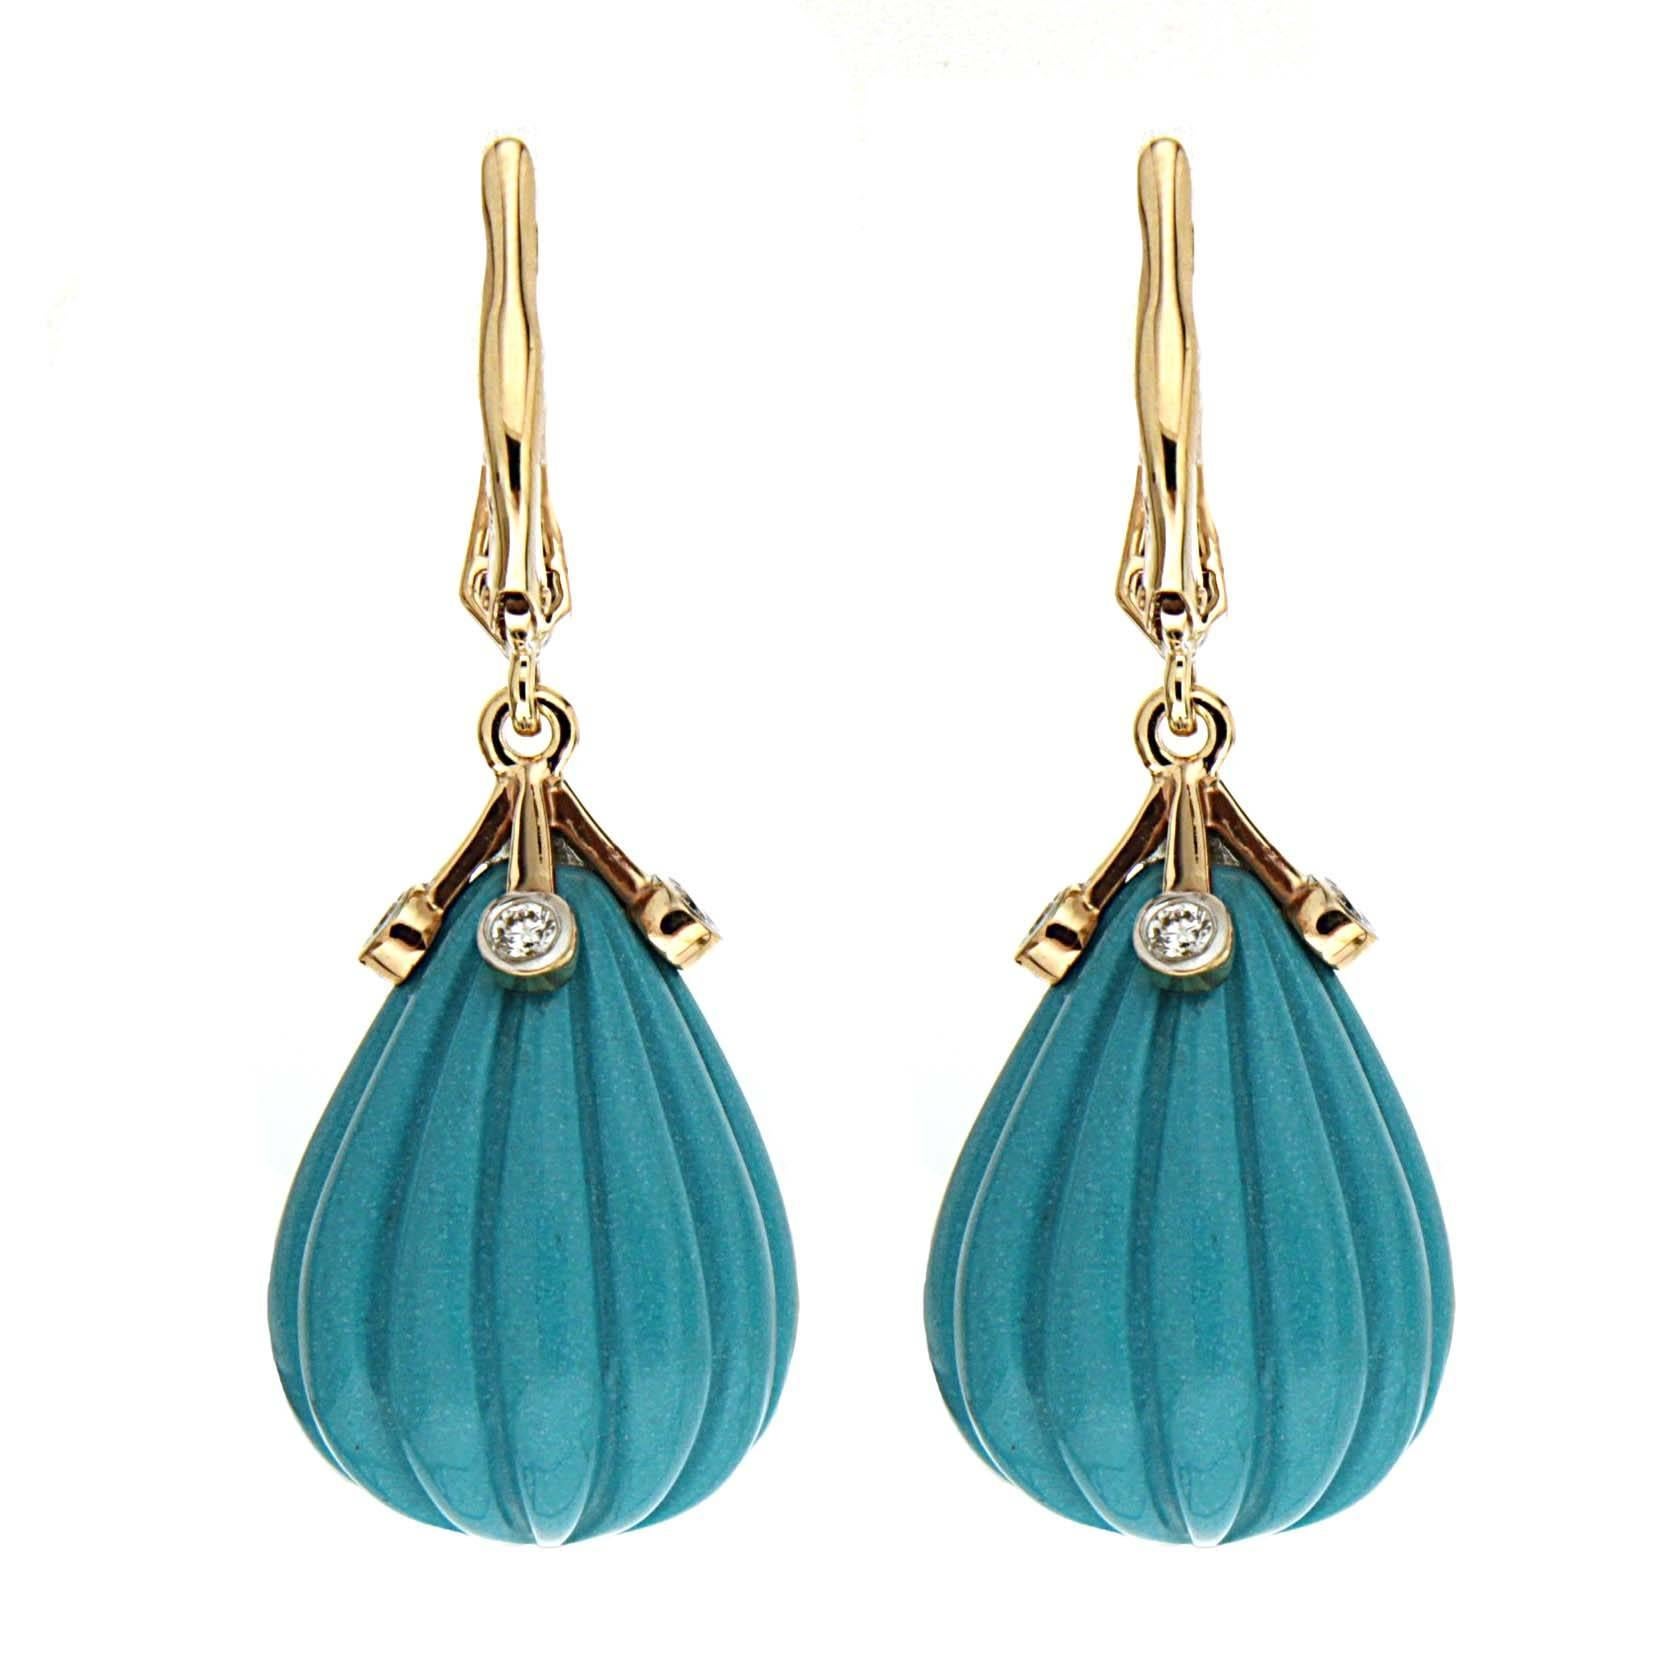 This lovely pair of earrings features carved drop of Turquoises with gold point diamond cap. The earrings are completed with diamond lever backs in 18kt Yellow Gold.